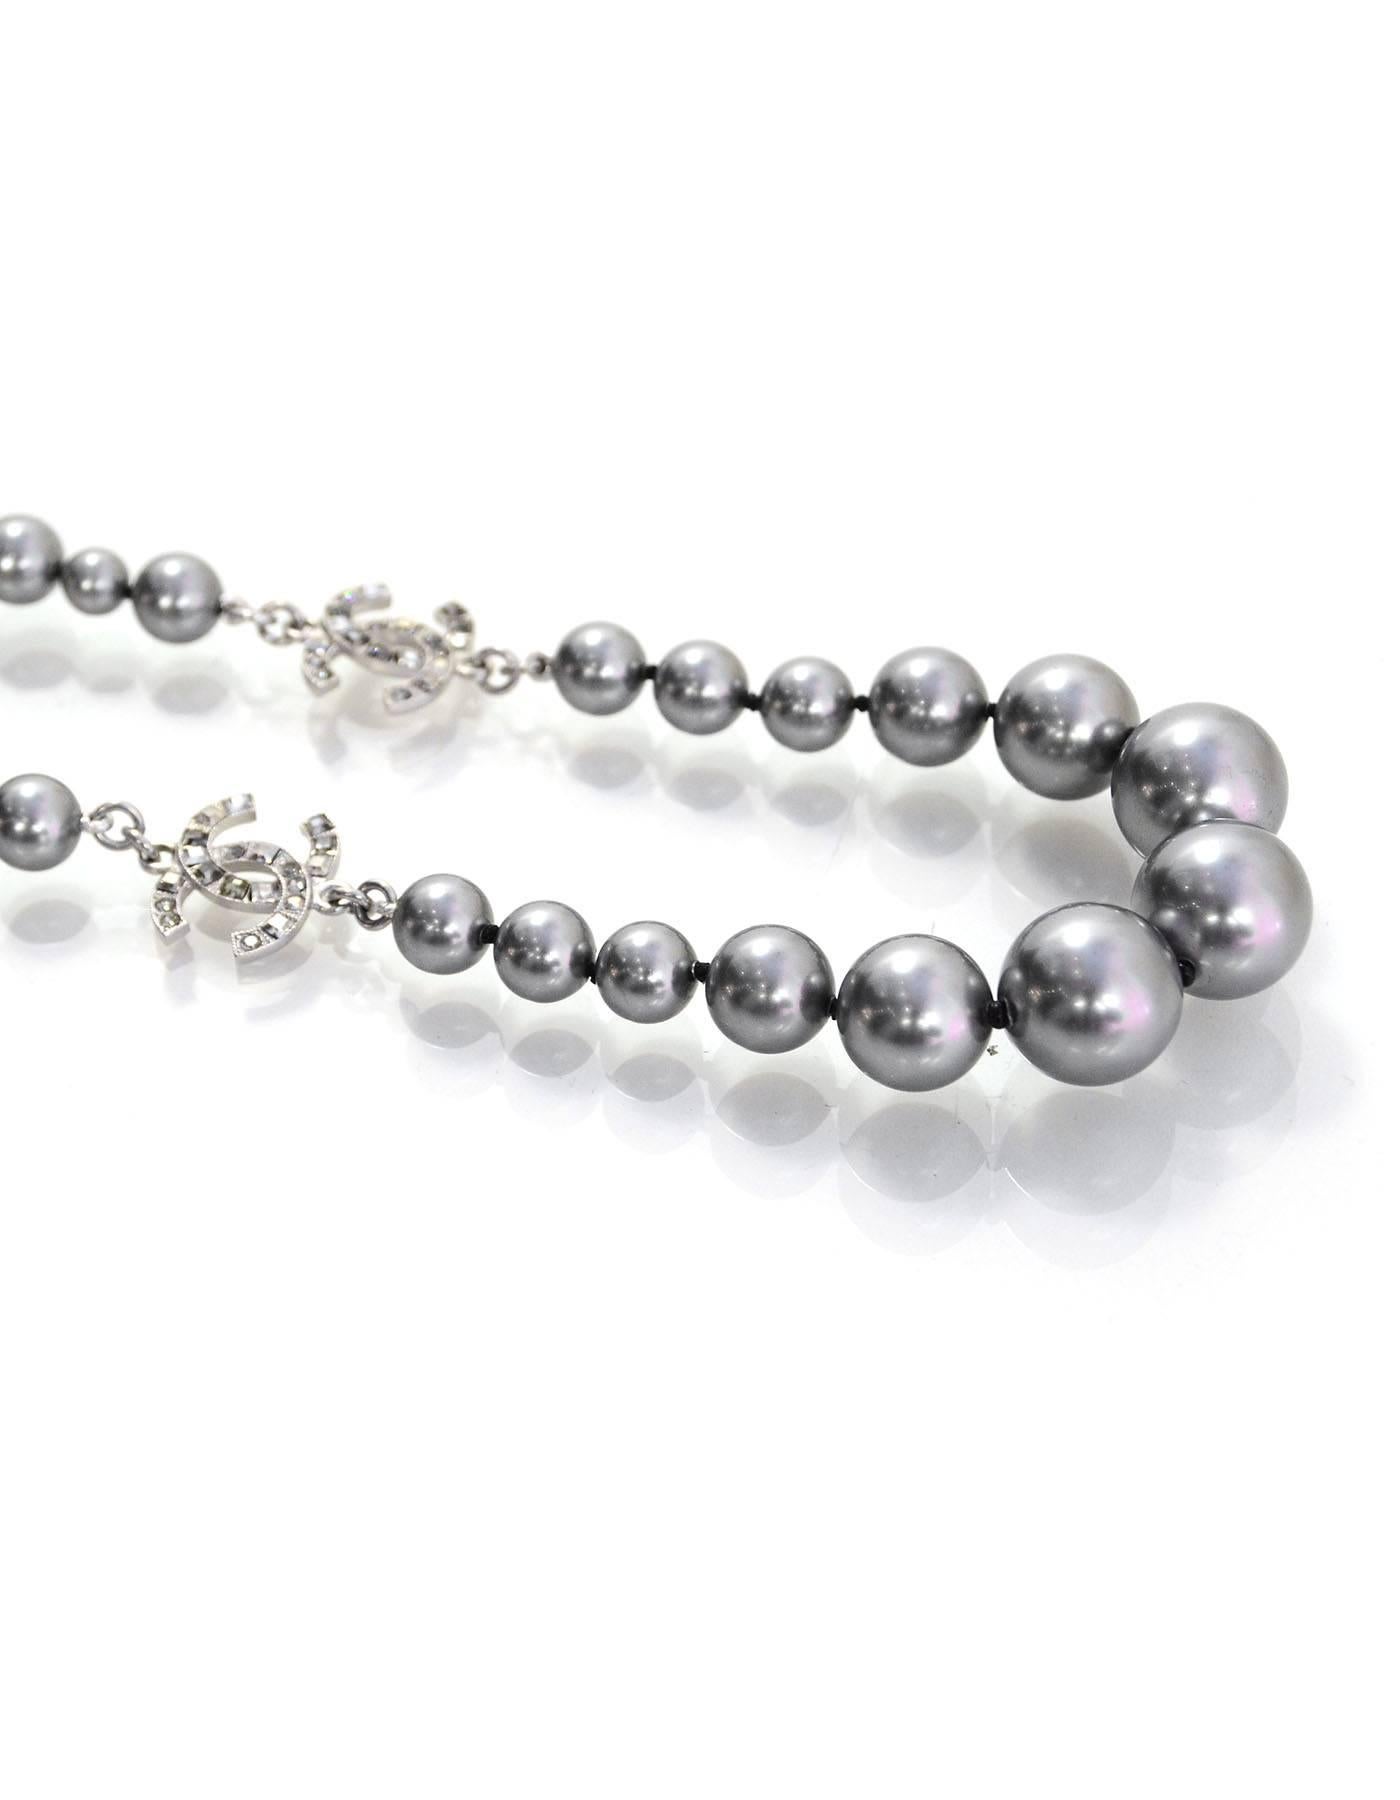 Chanel Grey Graduated Pearl & CC Choker Necklace
CC Pendants feature grey and clear crystals throughout

Made In: France
Year of Production: 2015
Color: Grey and silvertone
Materials: Metal, faux pearl and crystal
Closure: Lobster claw clasp
Stamp: